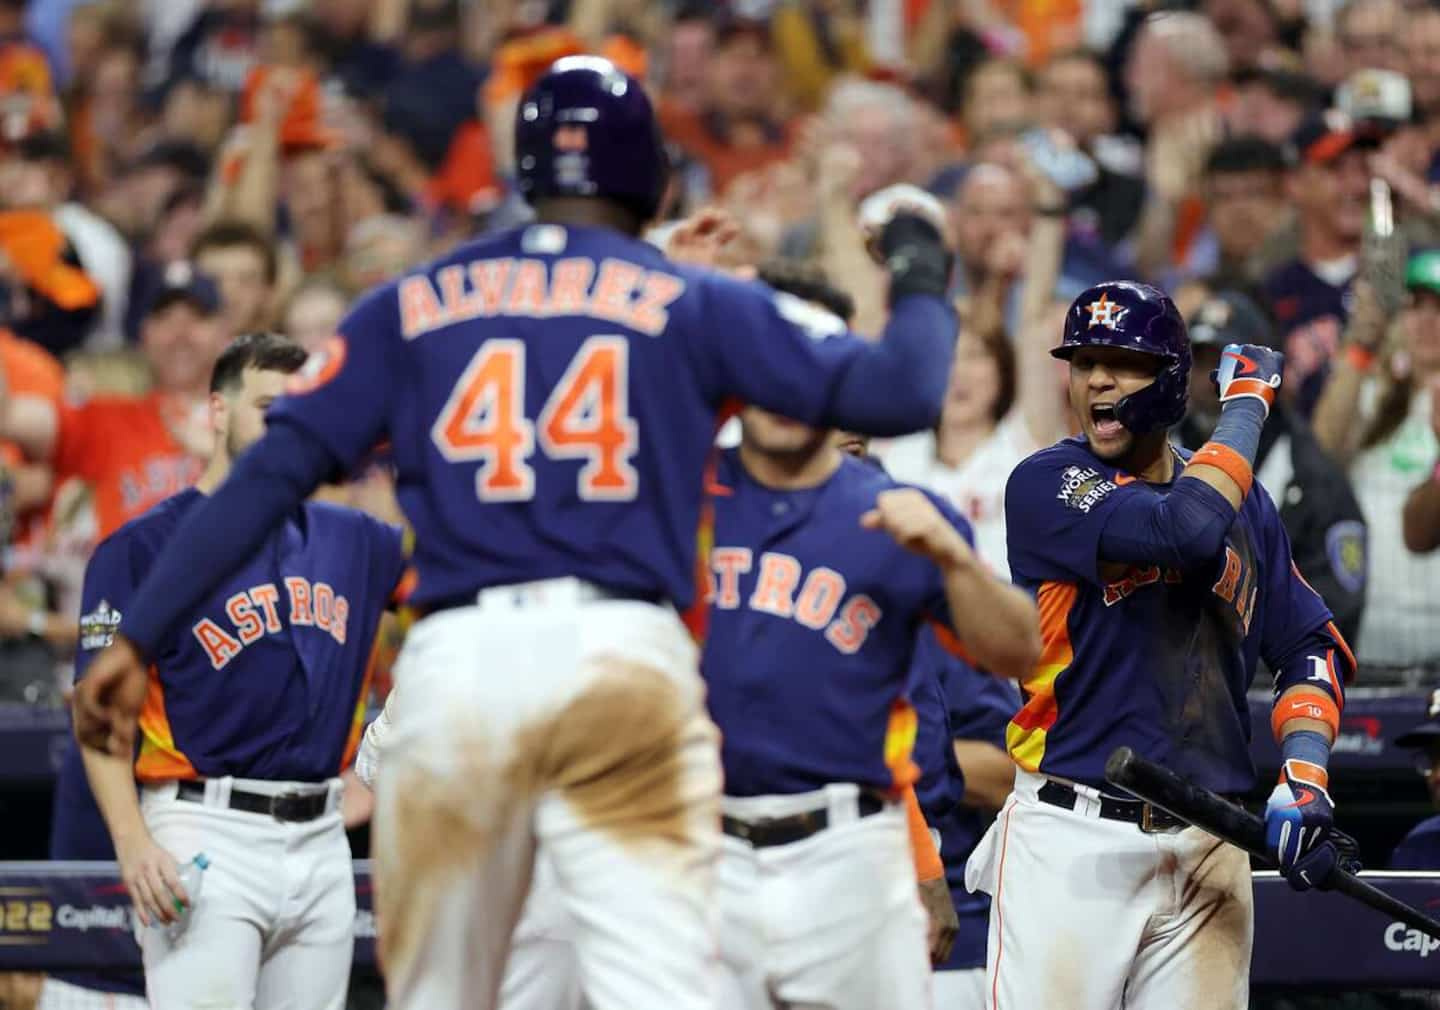 The Astros tie the World Series